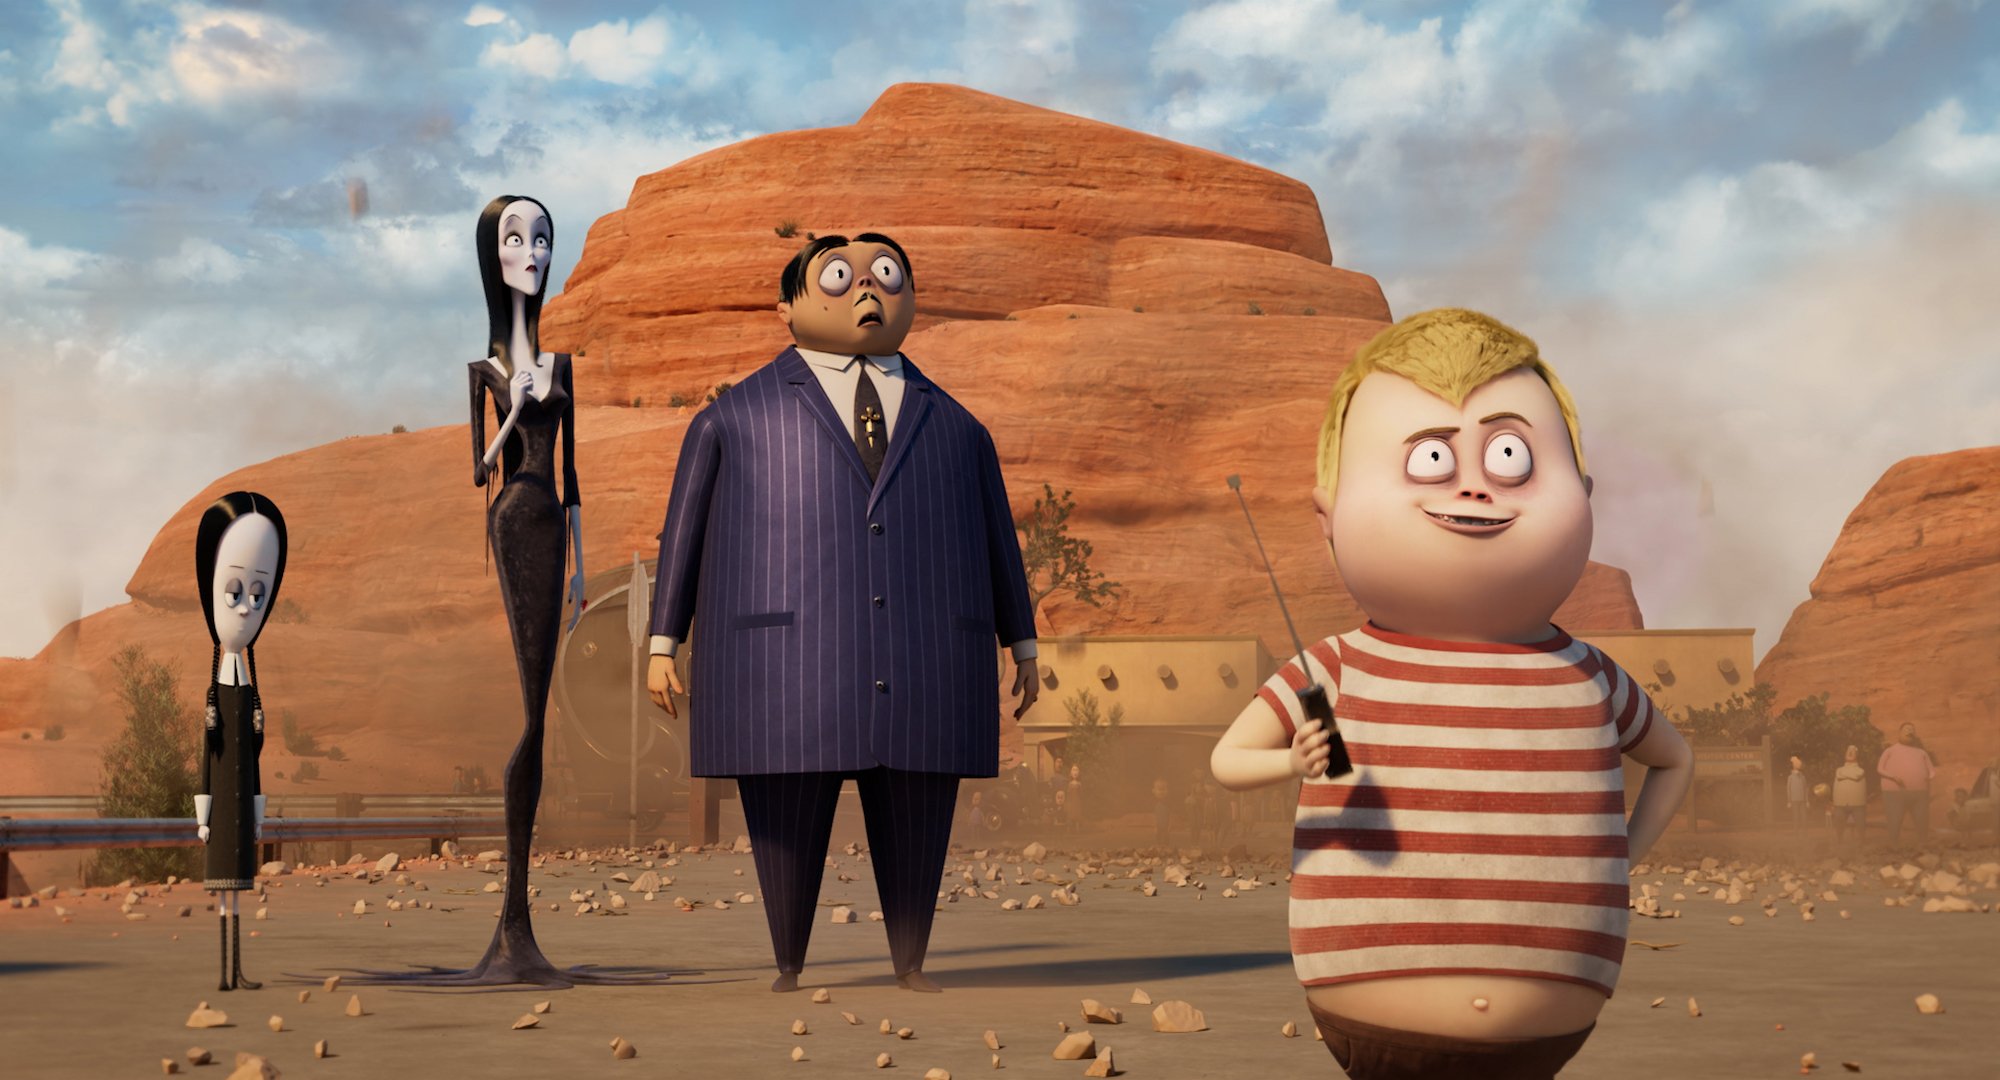 The Addams Family goes on vacation in Addams Family 2